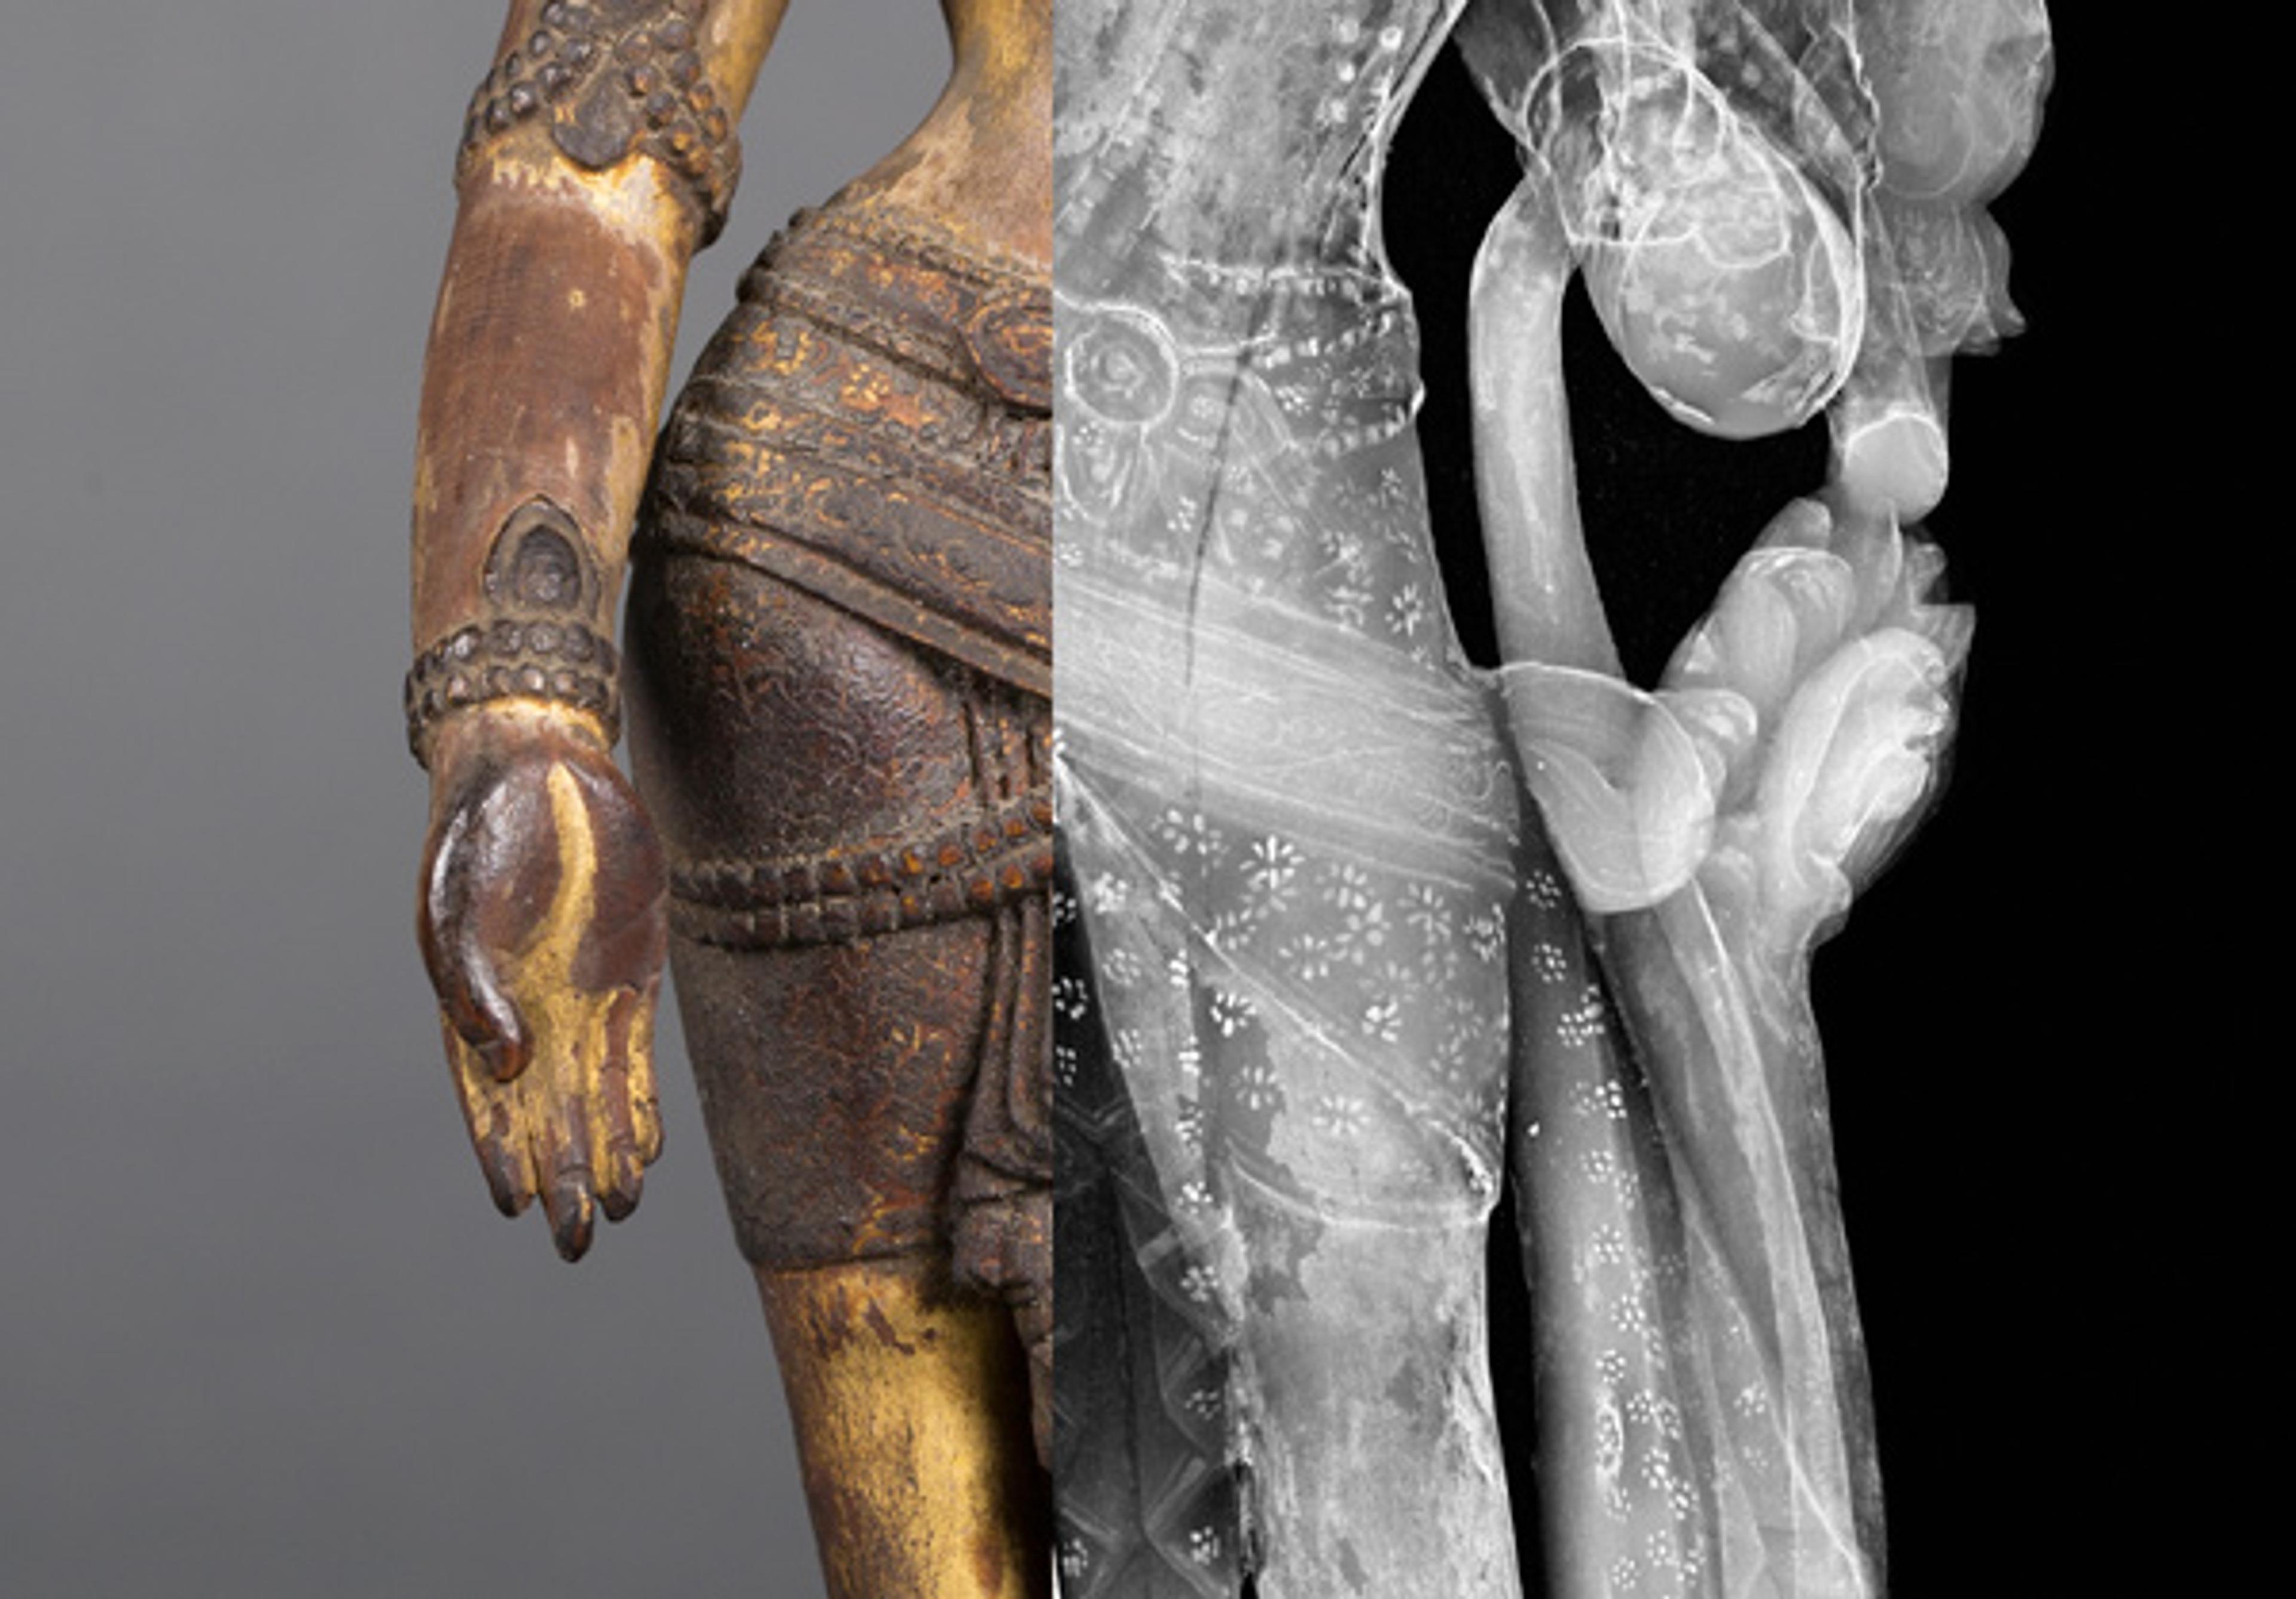 Left: Detail of garment showing an area where the gilded floral pattern is still preserved. Right: With the help of X-ray radiography, the delicate flower petals on the figure's dhoti can be visualized